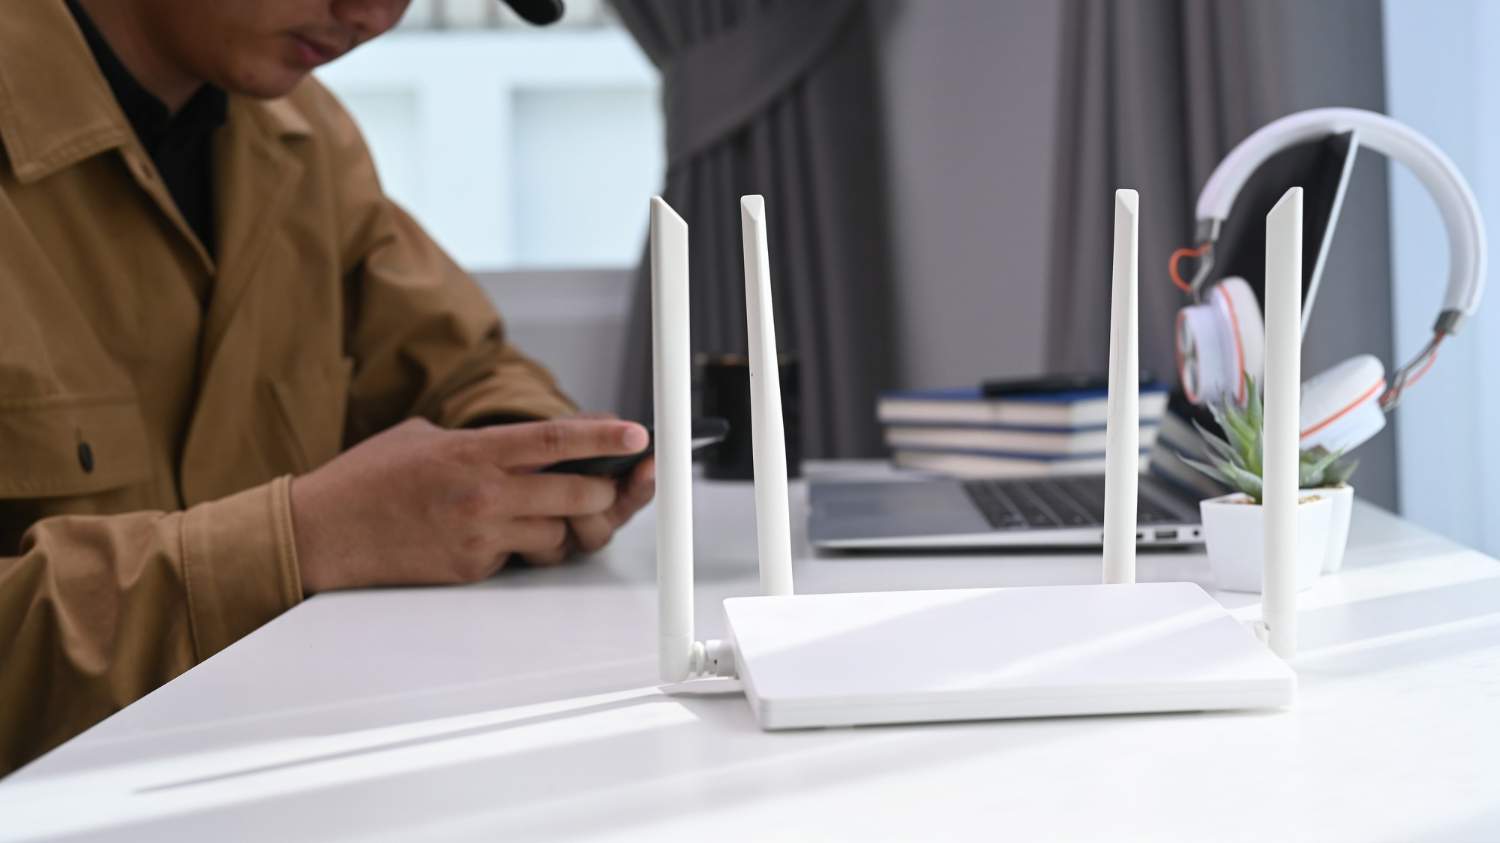 Advantages of Wireless Network